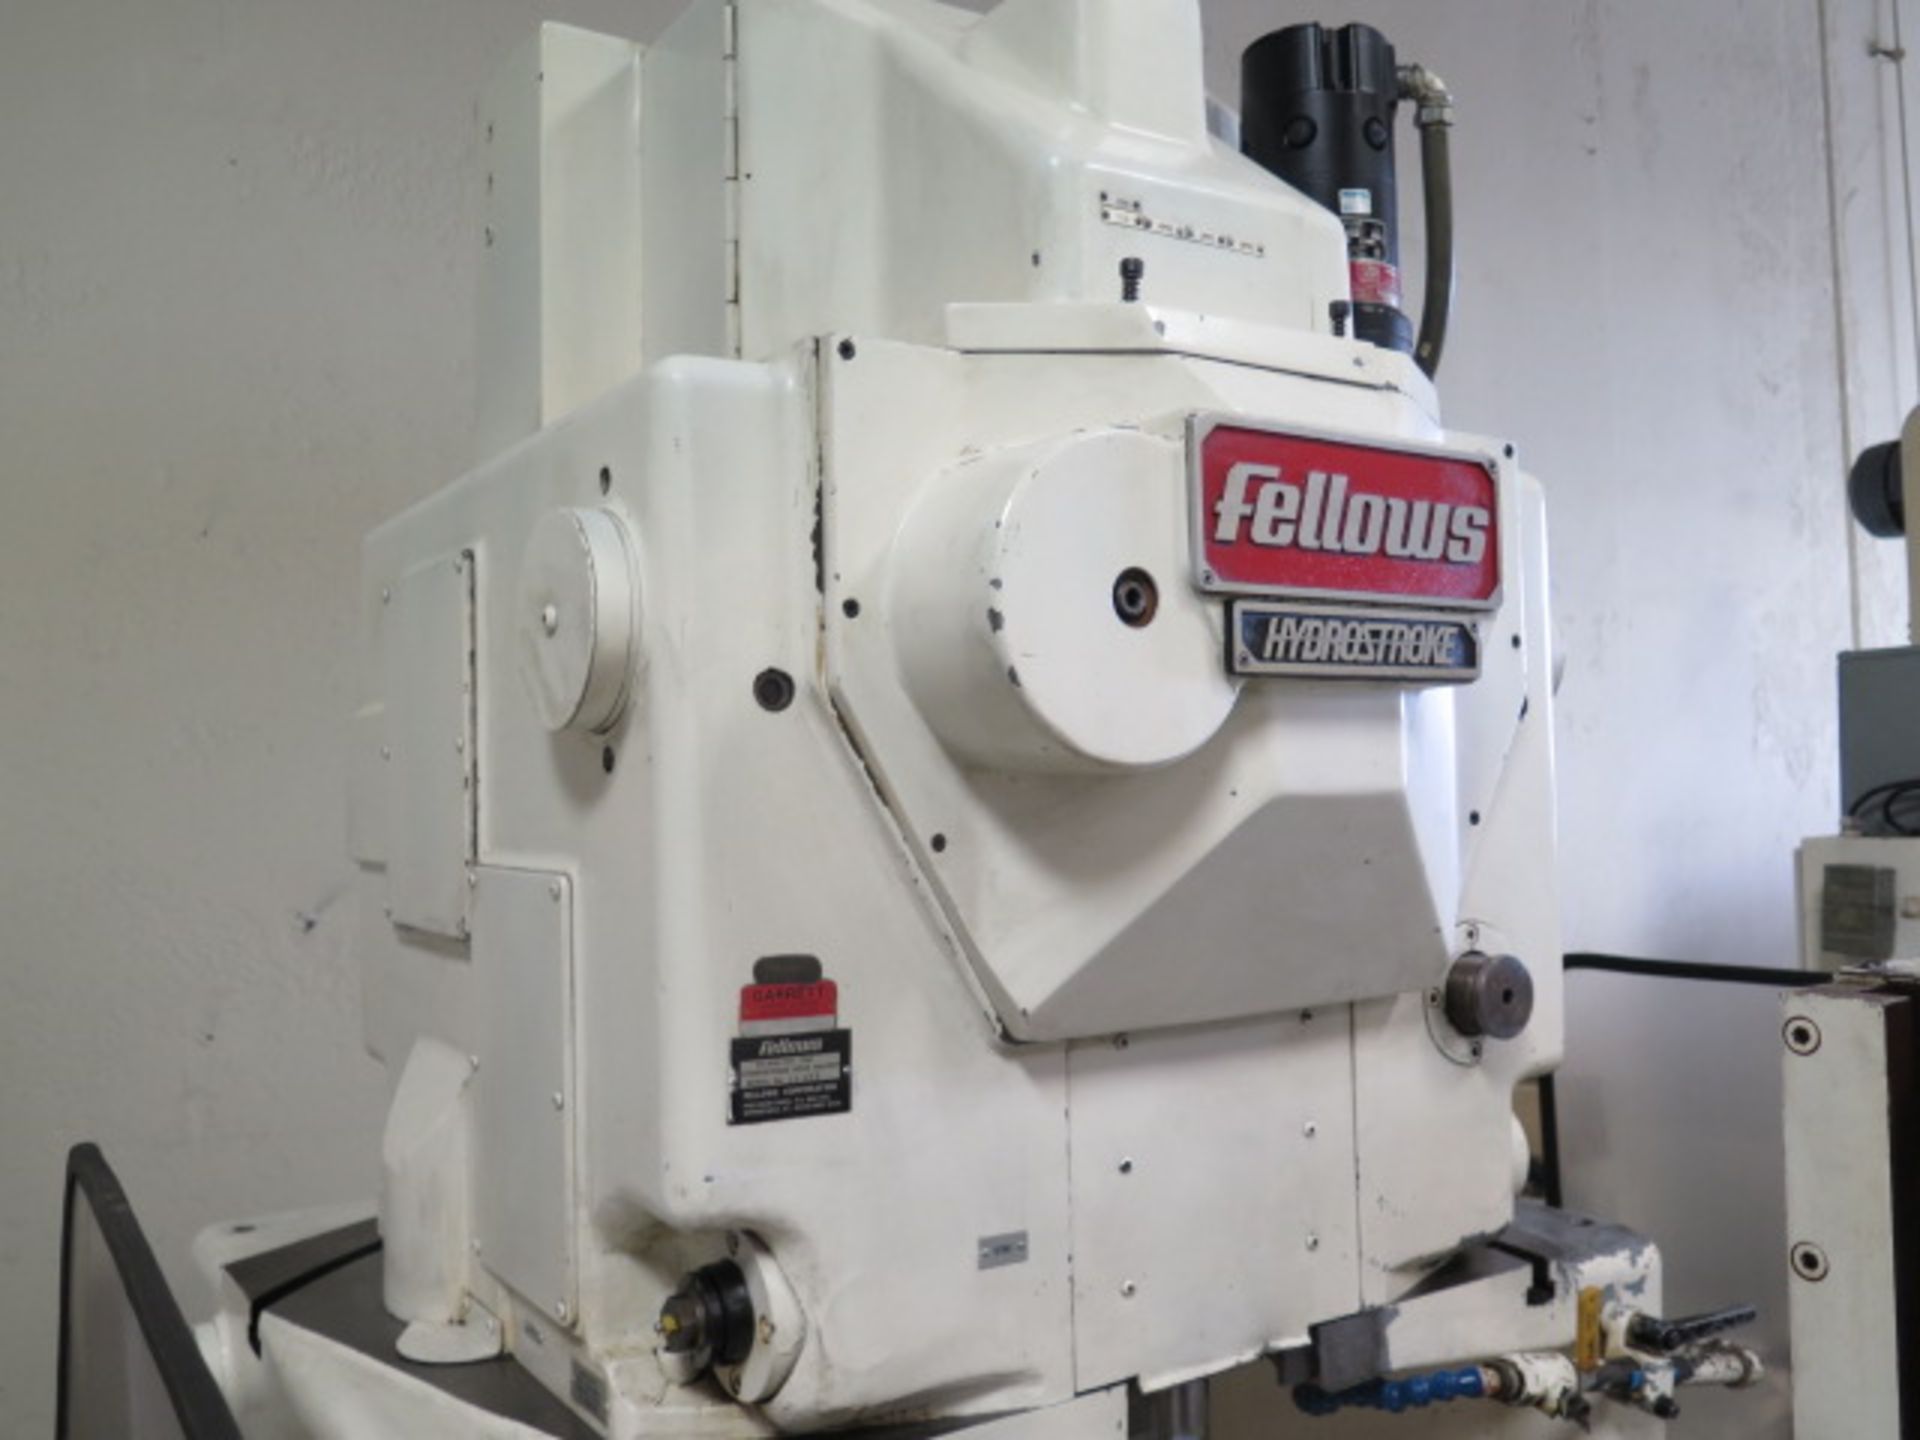 Fellows “Hydrostroke” CNC Gear Shaper w/ Fellows CNC Controls, Hydr Unit, Cooling Unit, SOLD AS IS - Image 9 of 12